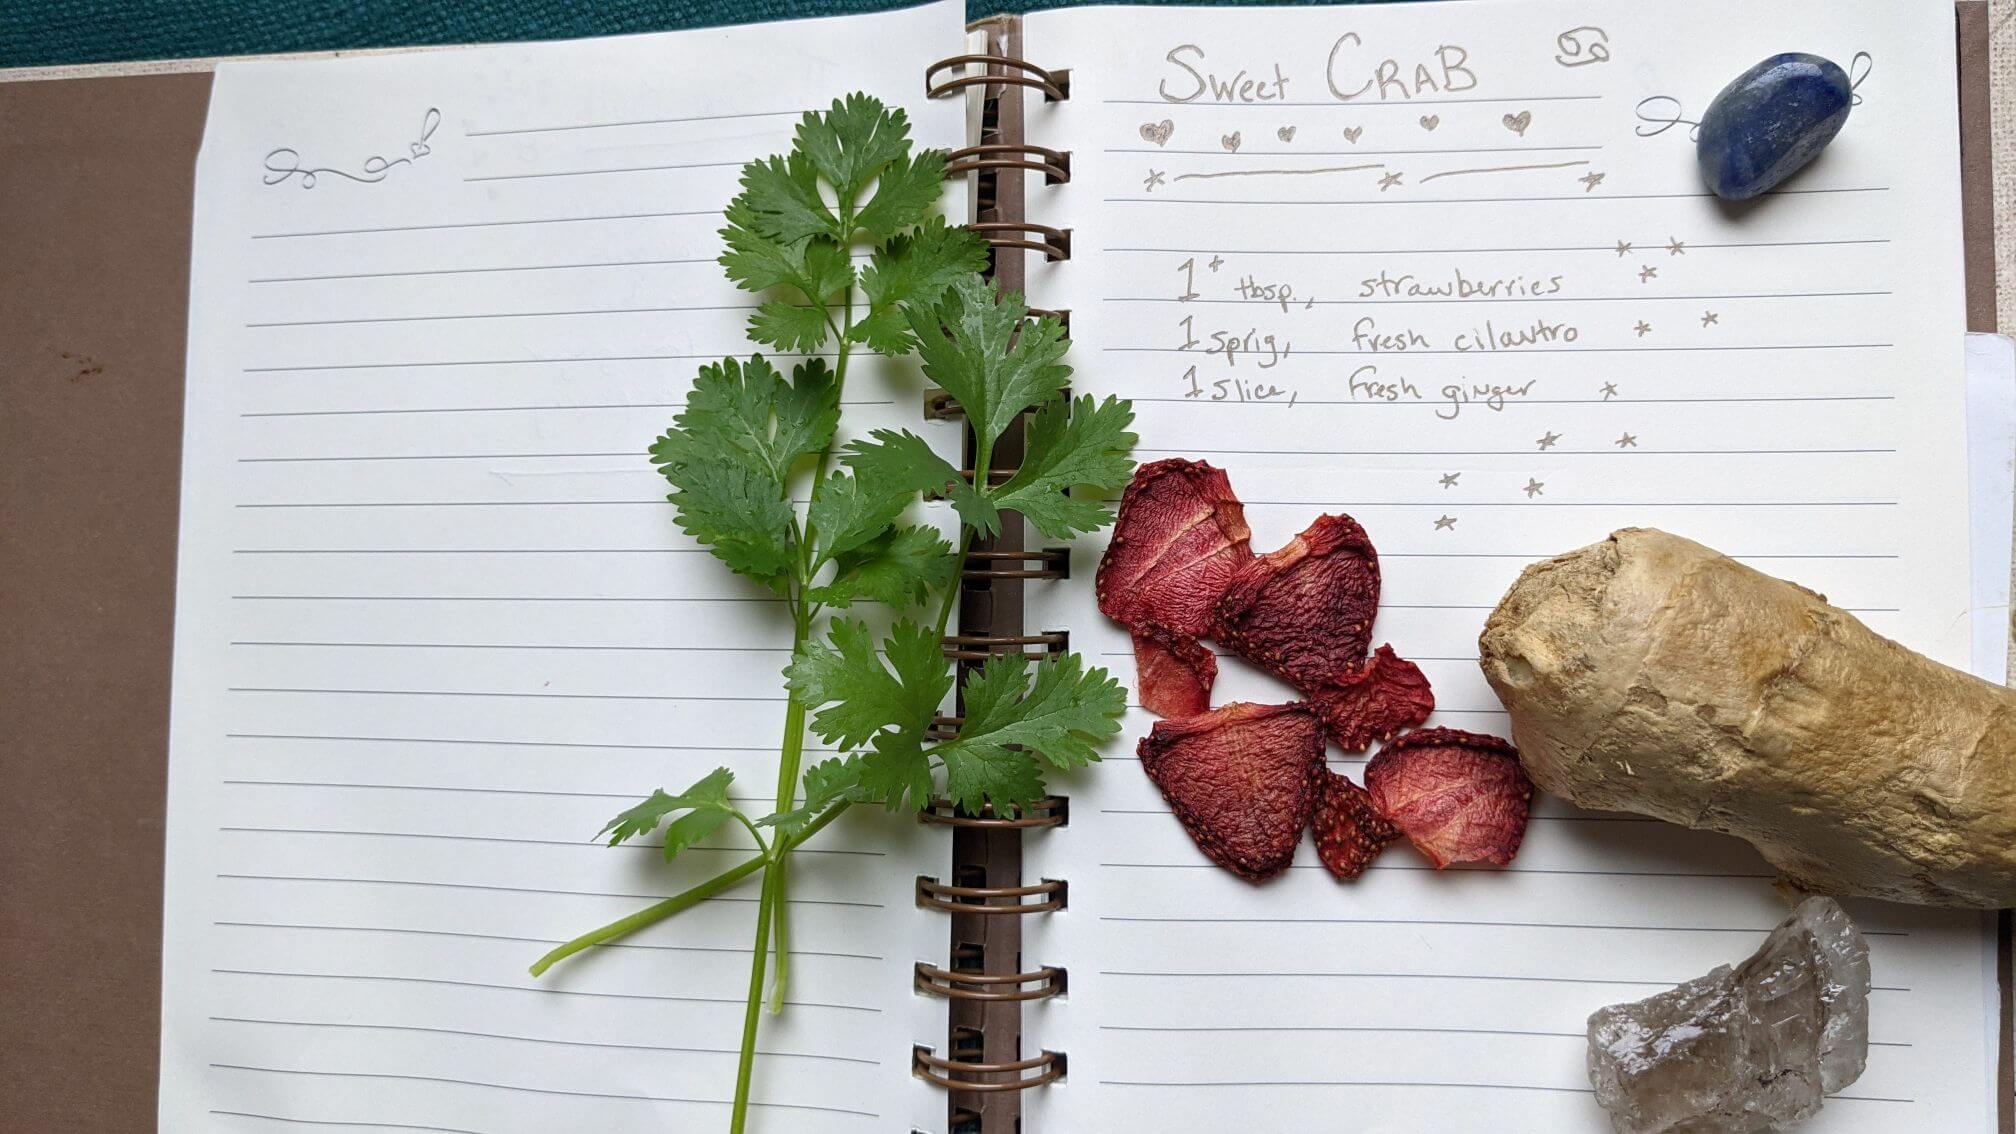 Handwritten recipe is shown with dehydrated strawberries, fresh cilantro and fresh ginger scattered on the page with gemstones.